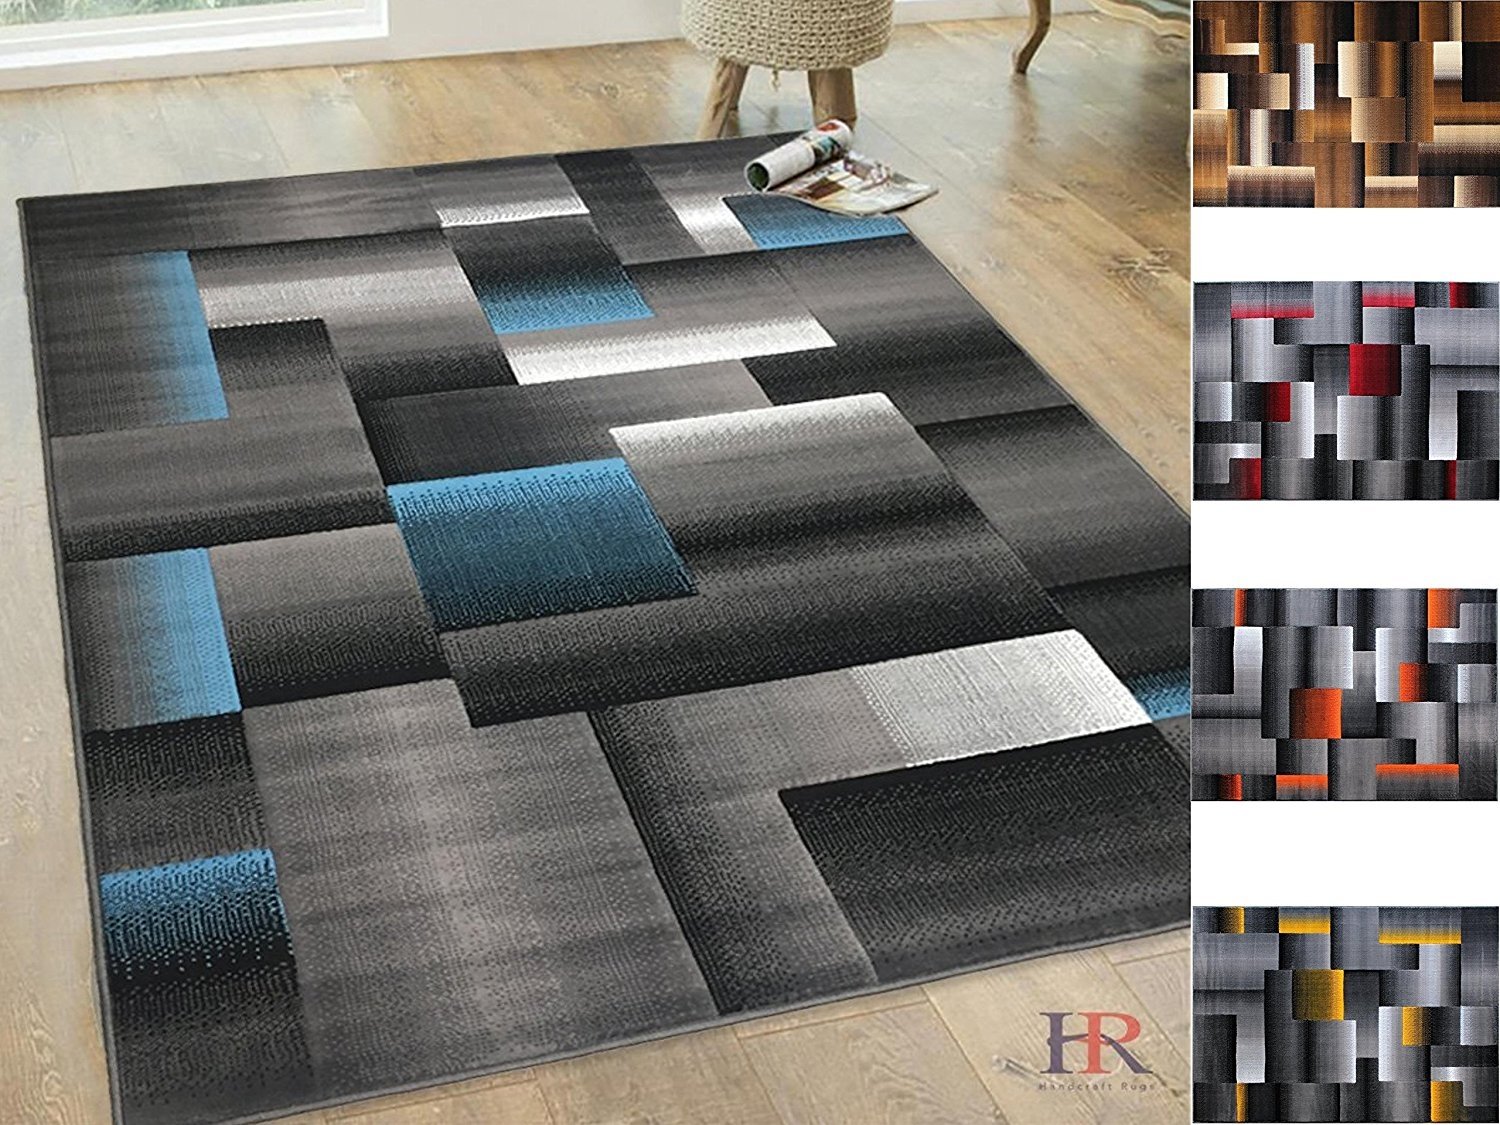 Handcraft Rugs Blue/Silver/Gray Abstract Geometric Modern Squares Pattern Area Rug 2 ft. by 3 ft. (Doormat)